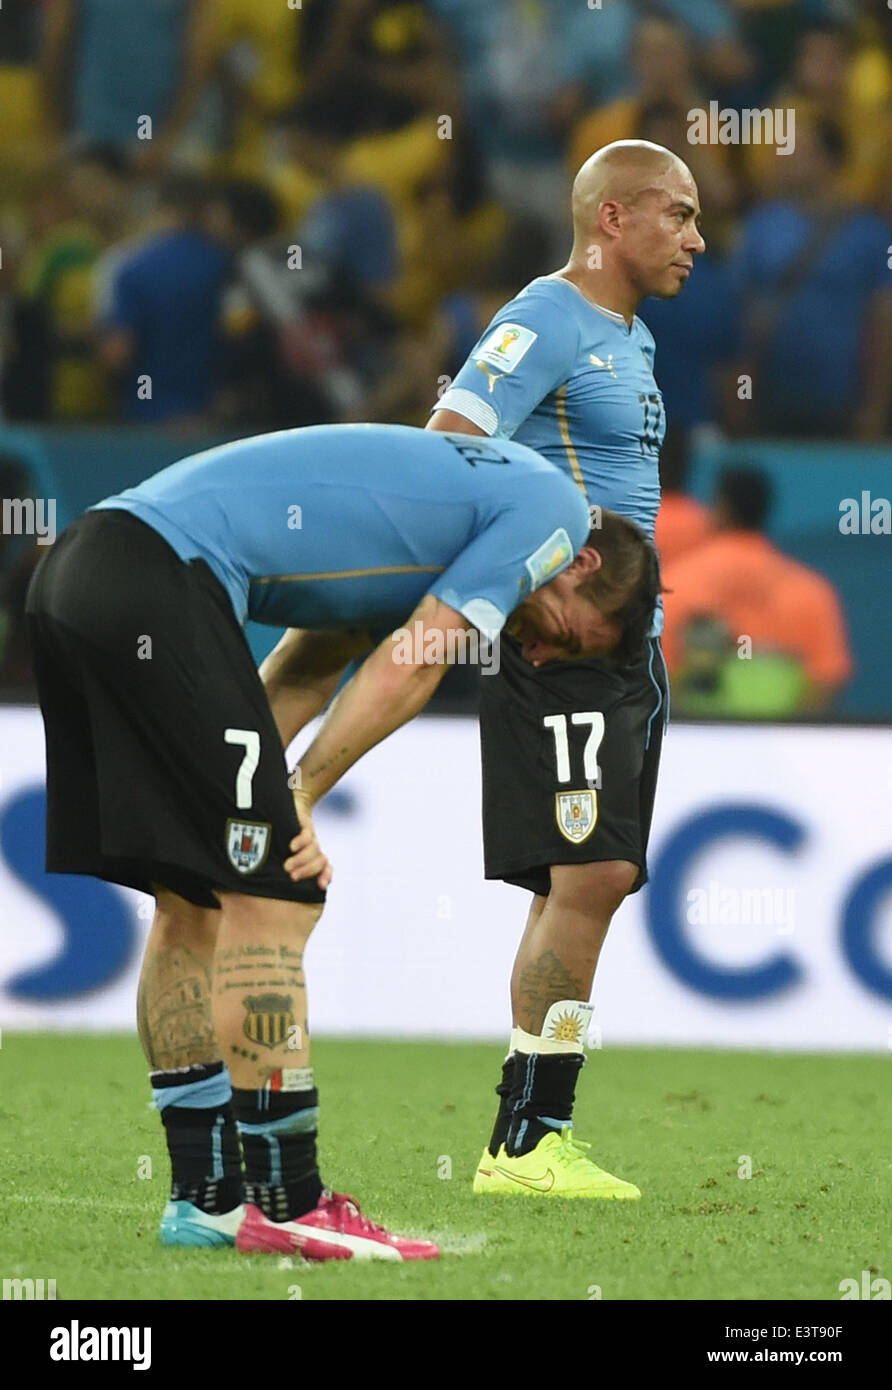 Rio De Janeiro, Brazil. 28th June, 2014. Uruguay's Egidio Arevalo Rios (R) and Cristian Rodriguez react after a Round of 16 match between Colombia and Uruguay of 2014 FIFA World Cup at the Estadio do Maracana Stadium in Rio de Janeiro, Brazil, on June 28, 2014. Colombia won 2-0 over Uruguay on Saturday. Credit:  Wang Yuguo/Xinhua/Alamy Live News Stock Photo